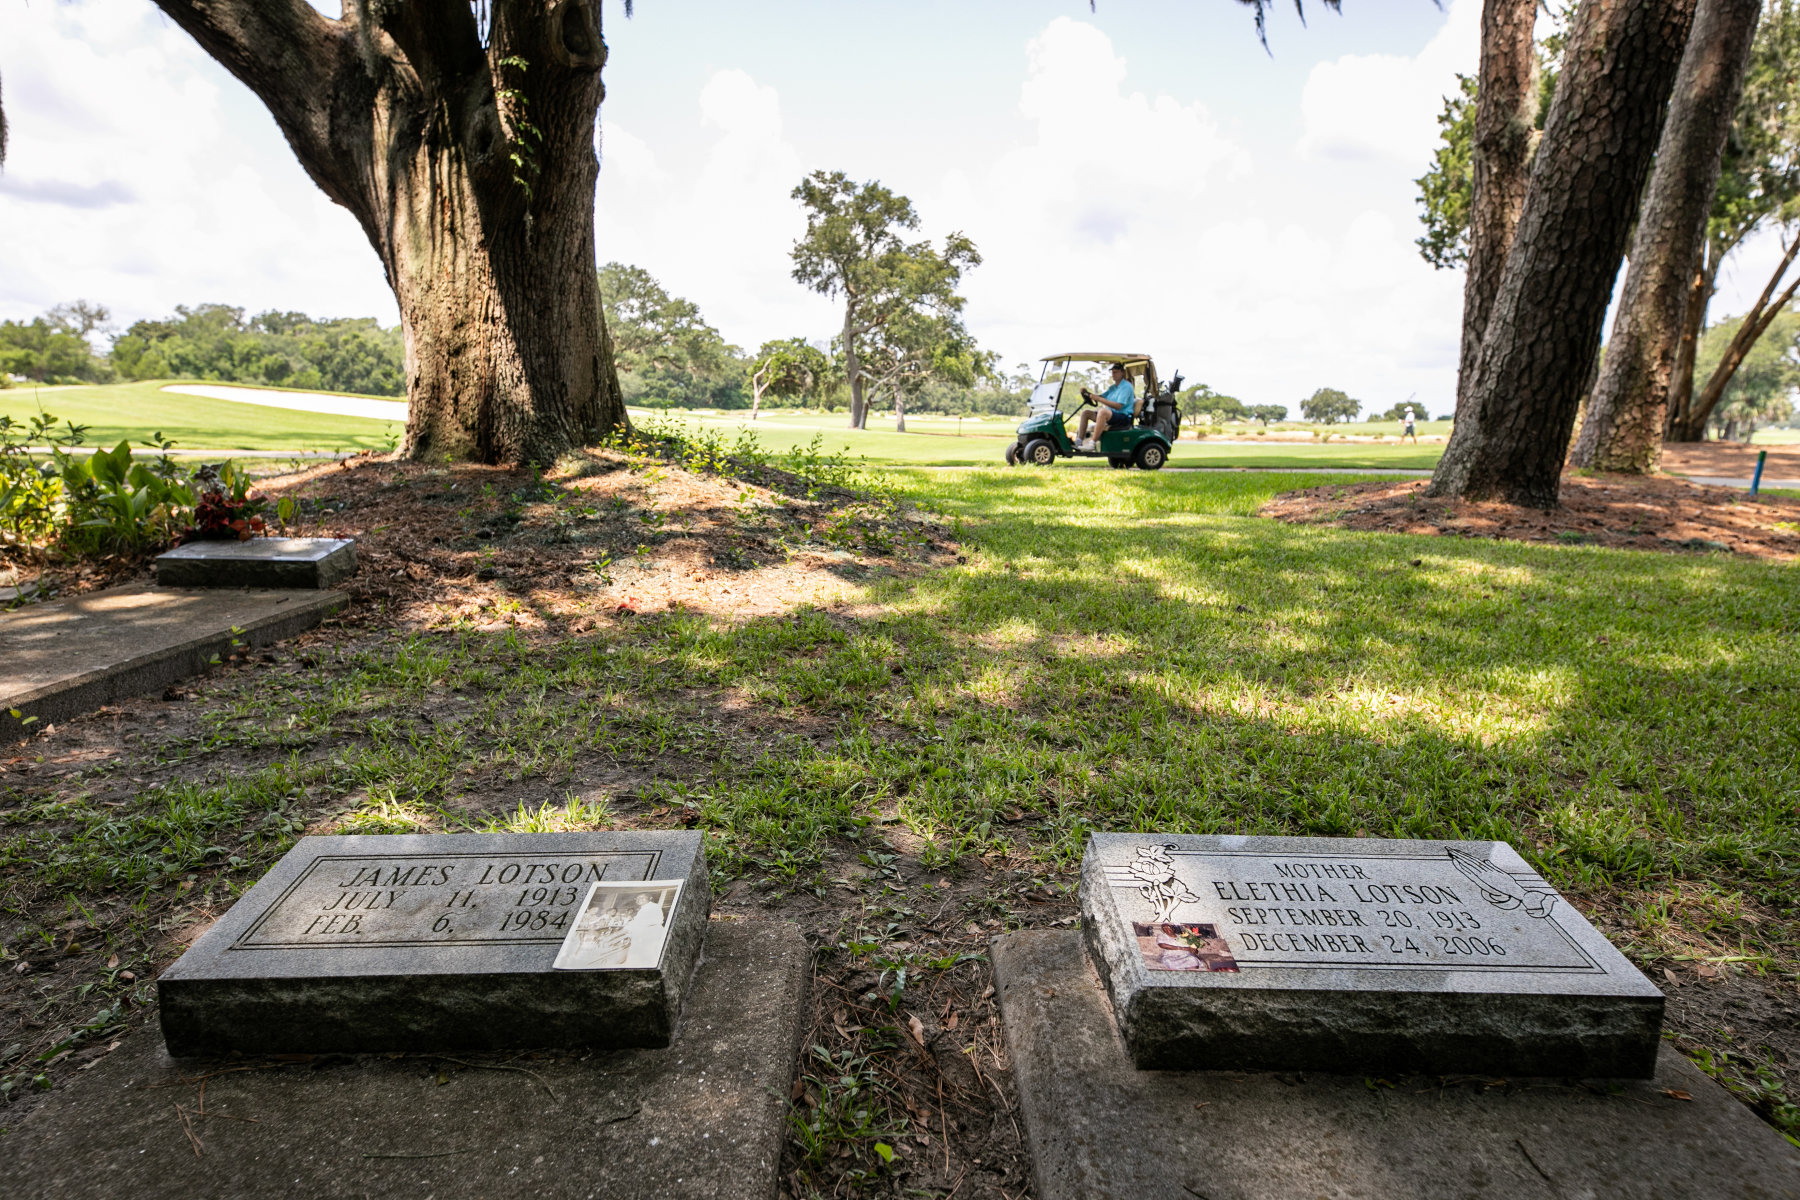 Cemetery Tour, Lunch At Saint Simons Island, Dinner in St